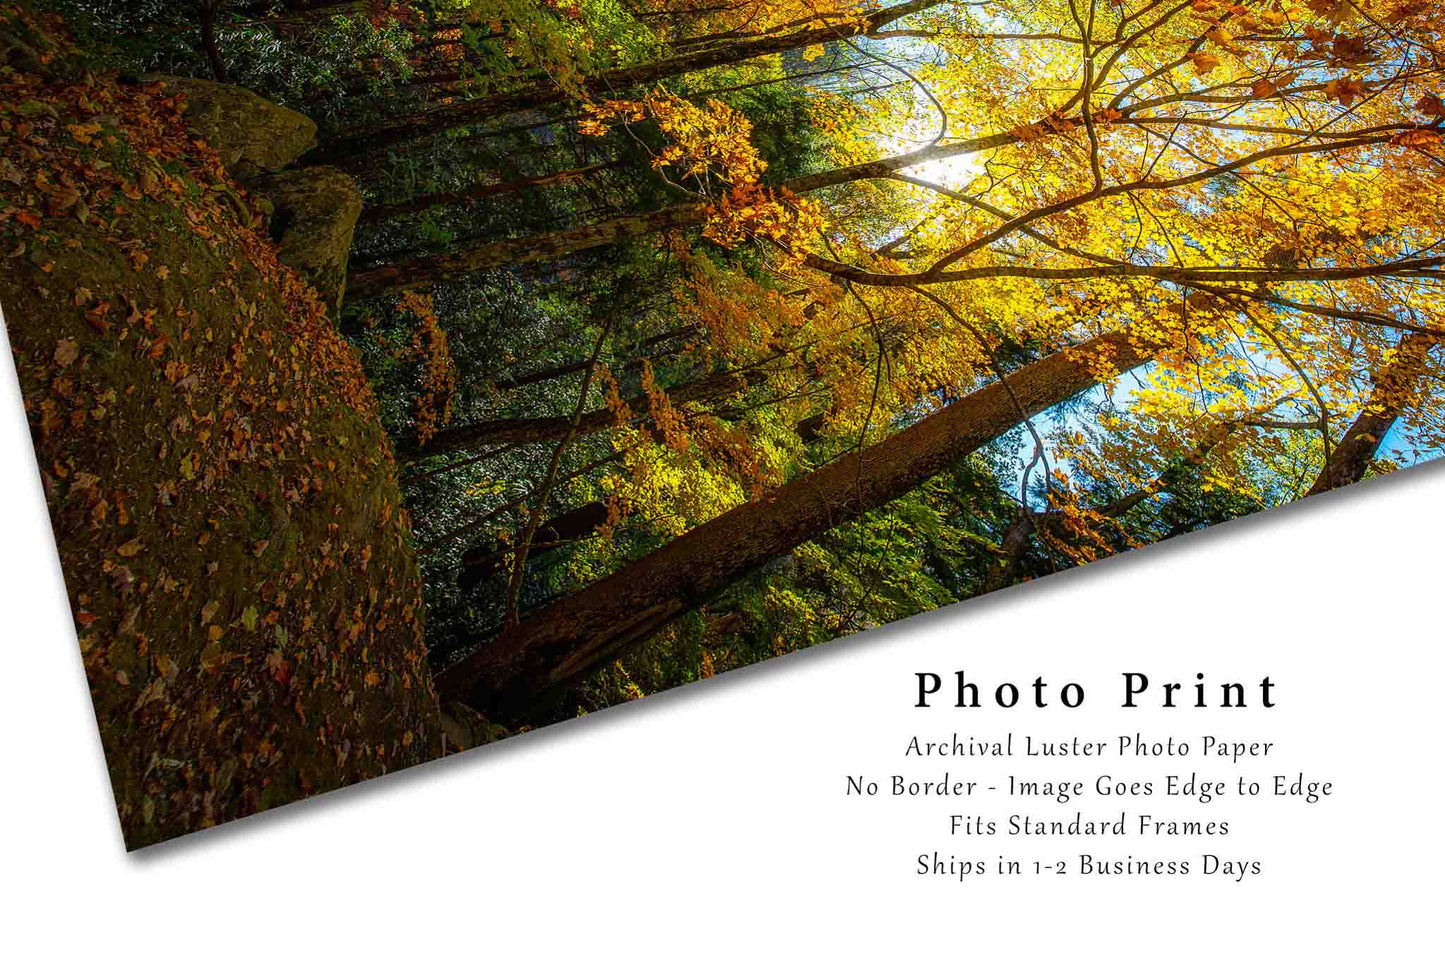 Autumn Photography Print - Picture of Sunlight Illuminating Trees with Fall Color in Great Smoky Mountains Tennessee - Forest Wall Art Decor